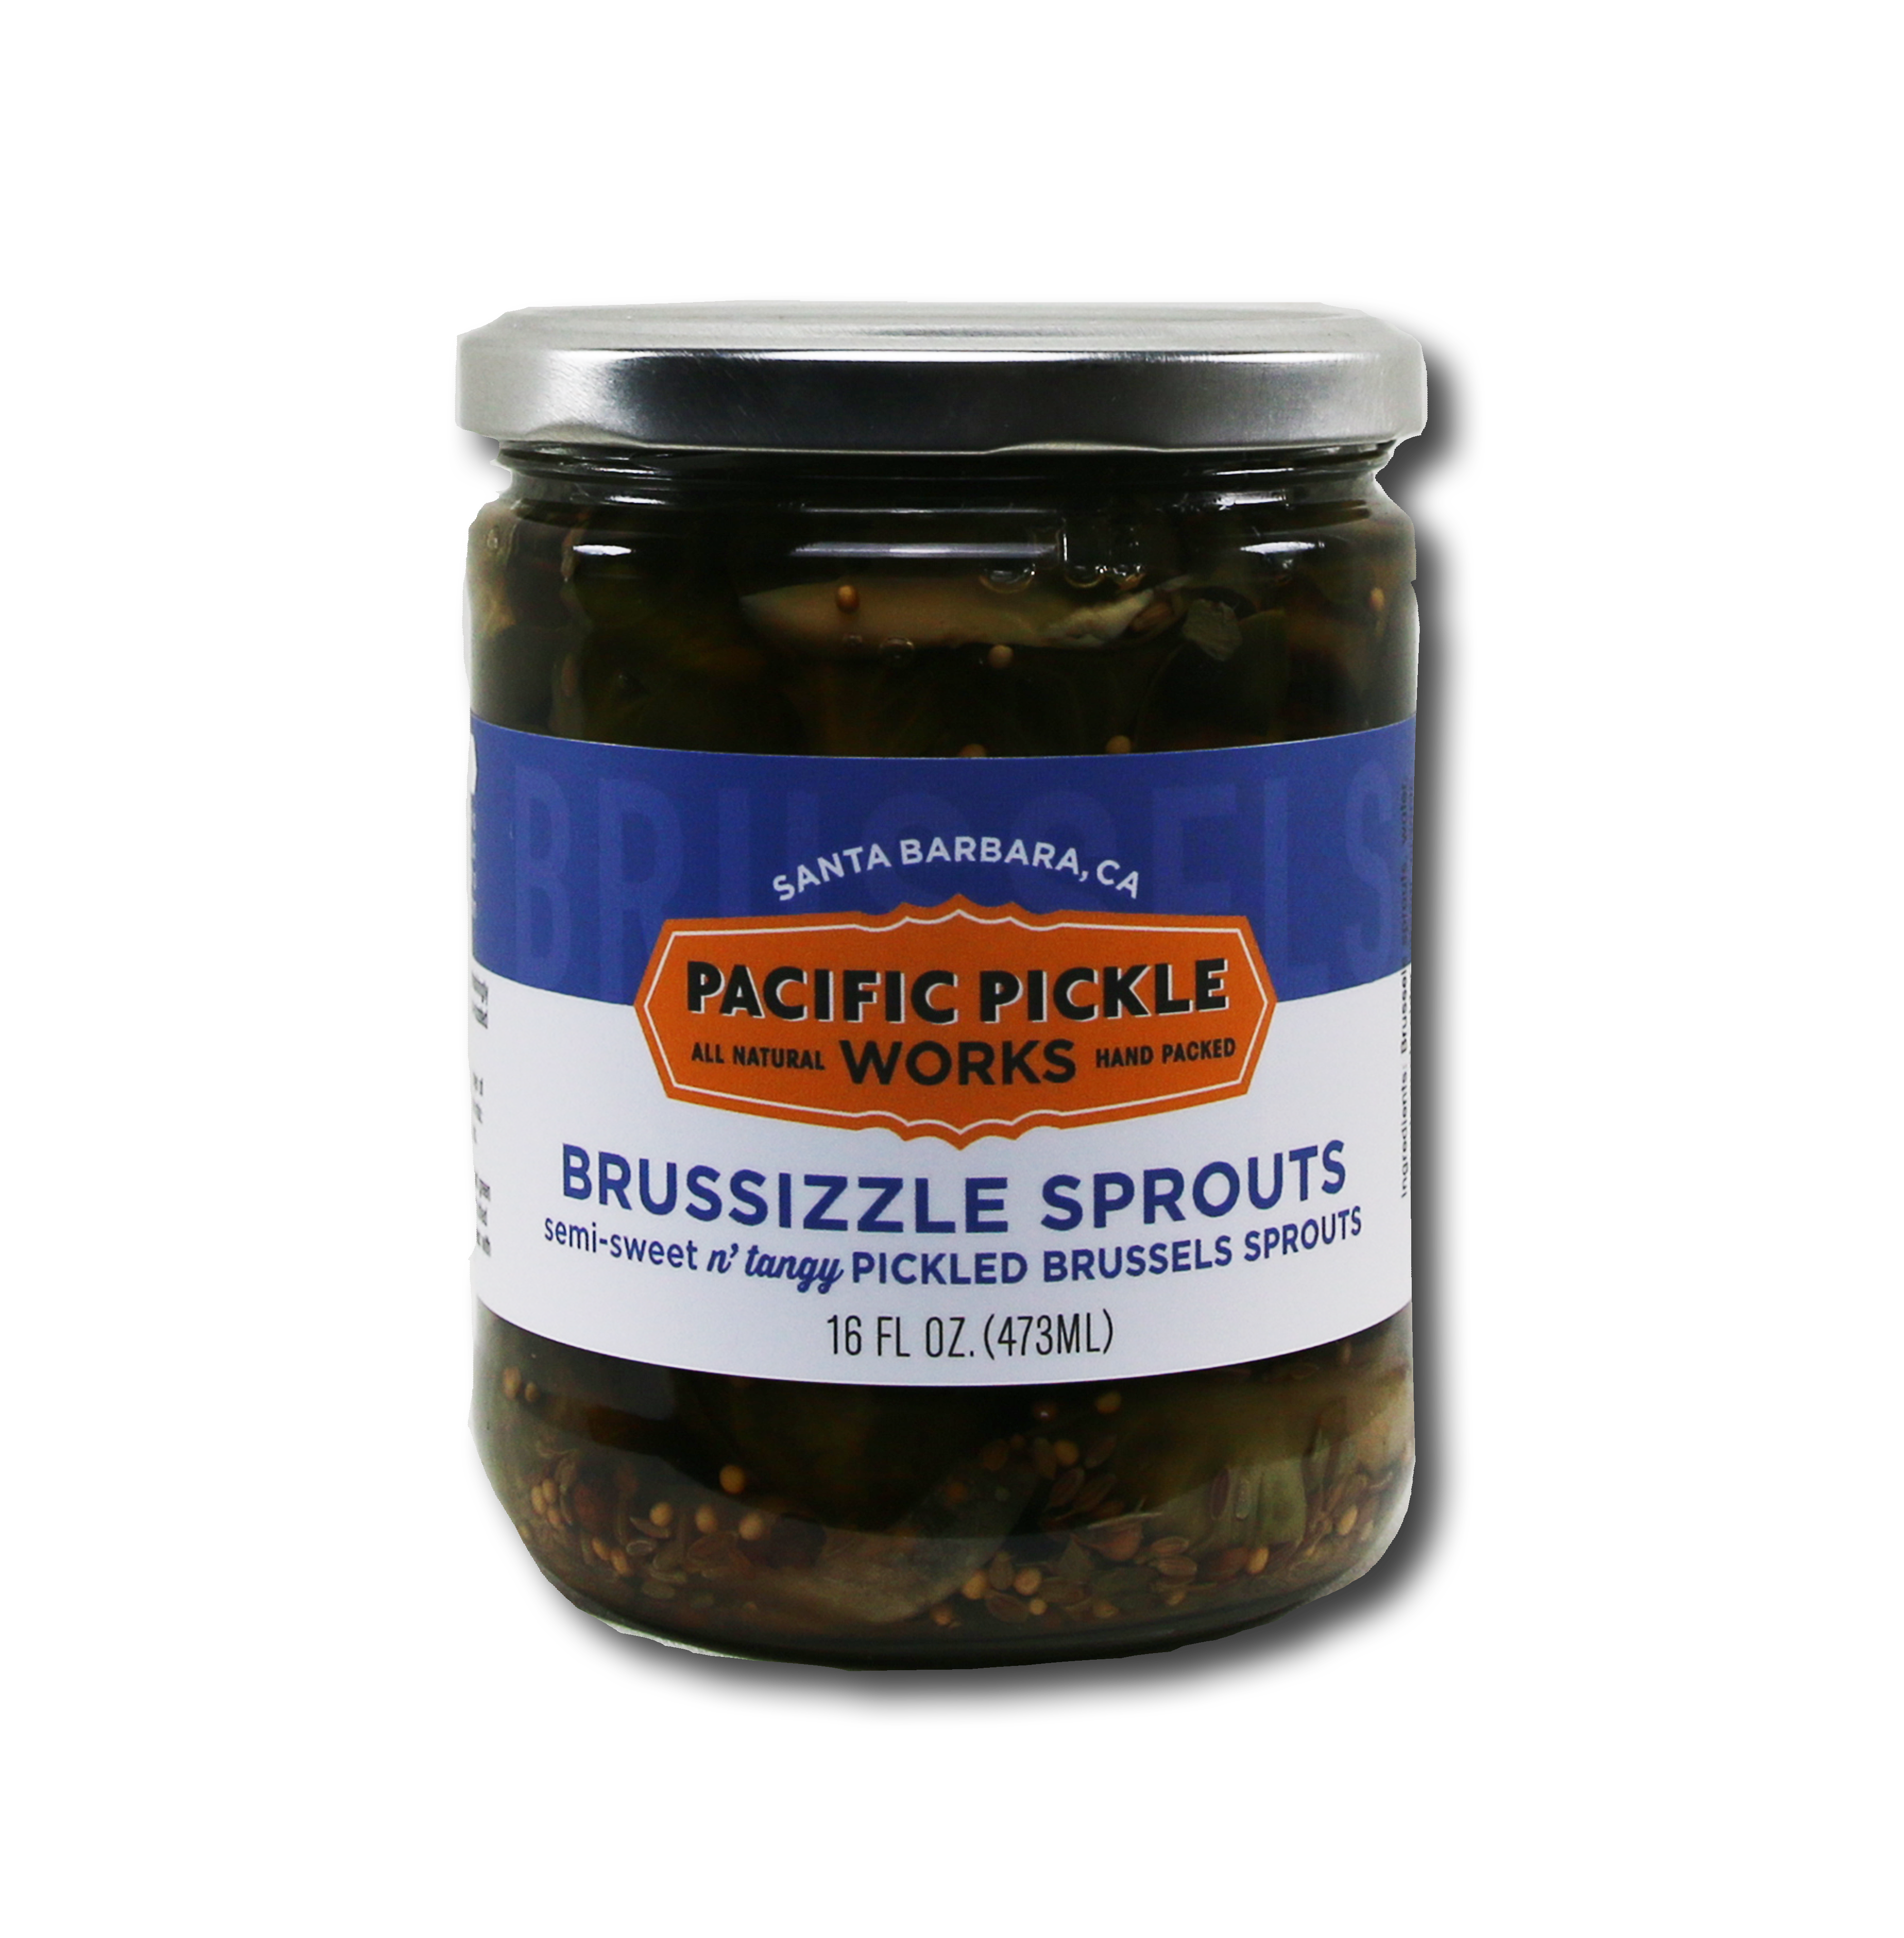 Brussizzle Sprouts